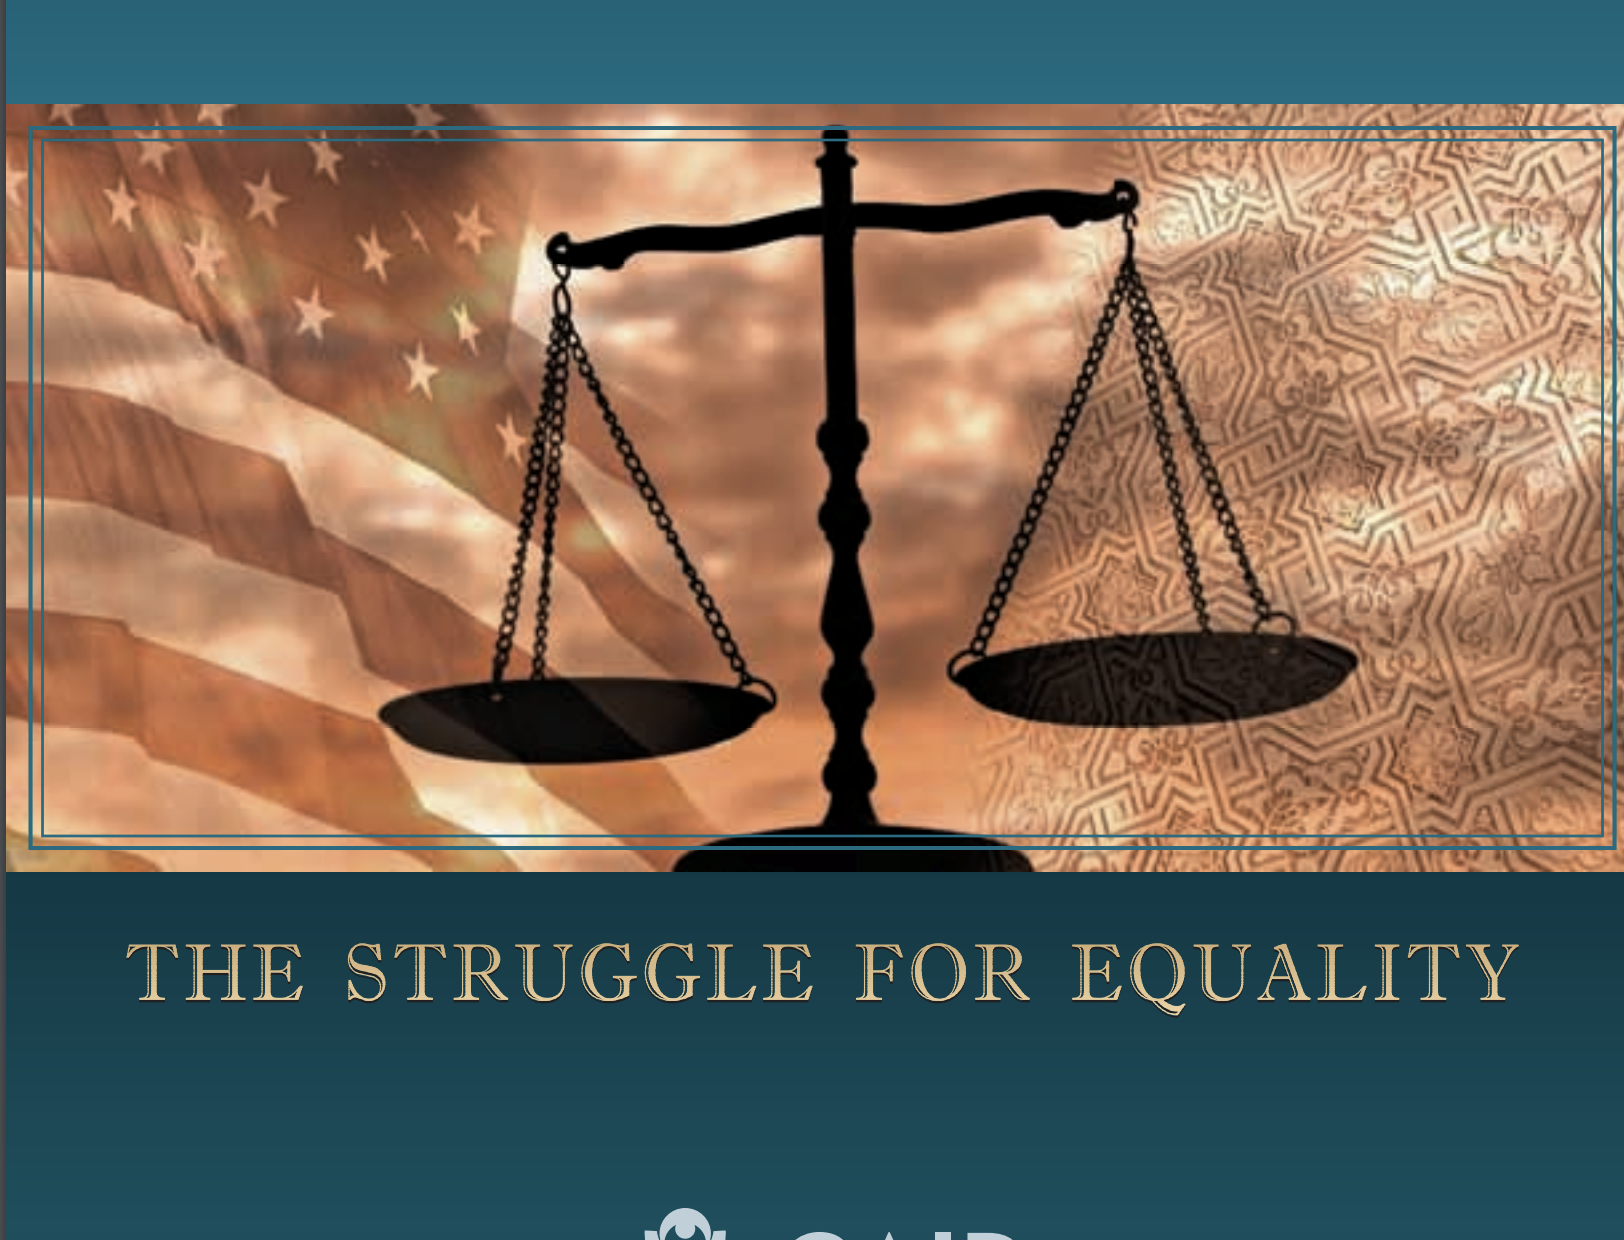 2006 Civil Rights Report: The Struggle for Equality